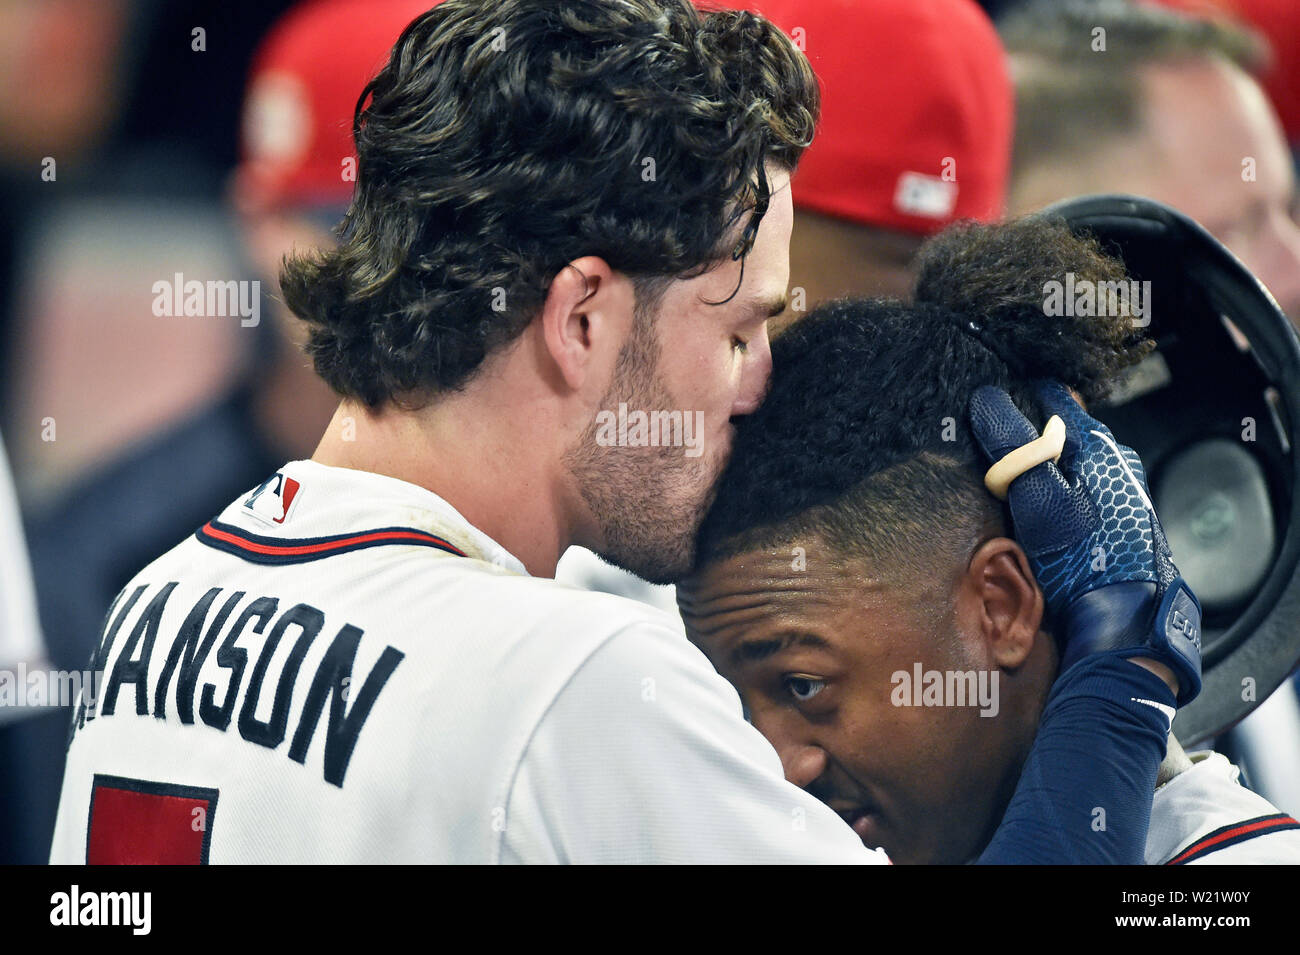 Atlanta, GA, USA. 04th July, 2019. Atlanta Braves shortstop Dansby Swanson  (left) kisses the head of infielder Ozzie Albies (right) after hitting an  eighth inning home run during a MLB game against